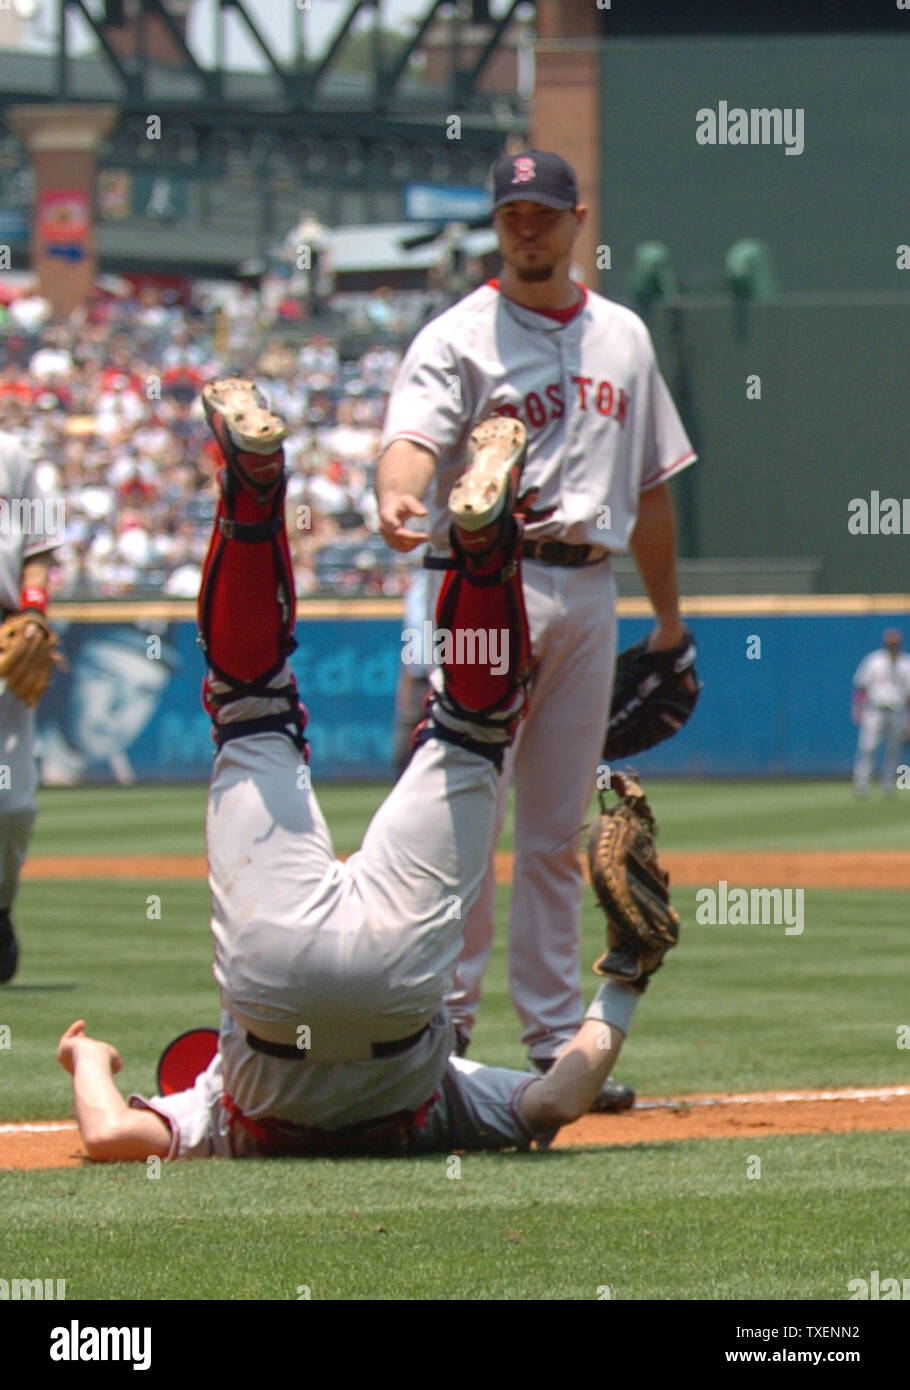 Boston Red Sox catcher Jason Varitek is feet up on the first base line after falling while trying to field a pop fly hit by Atlanta Braves Jeff Francoeur in the third inning June 17, 2006, in Atlanta's Turner Field. Boston pitcher Josh Beckett look on. The Red Sox defeated the Braves 5-3 (UPI Photo/John Dickerson) Stock Photo